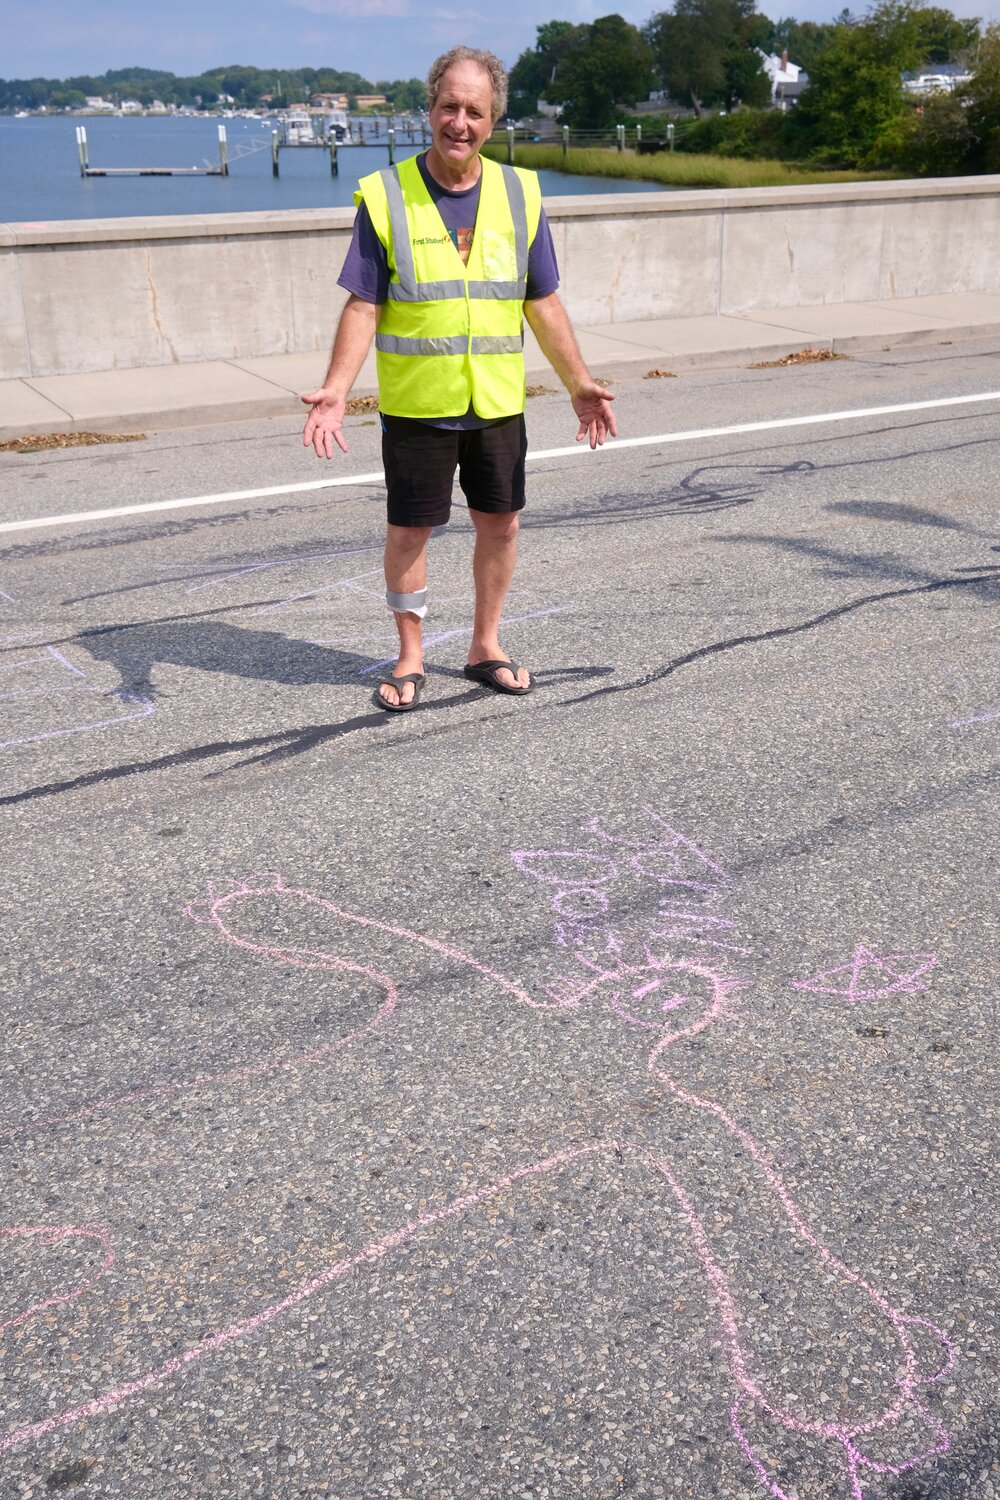 John Vitkevich, one of the local event organizers, stands next to the outline some children drew around him on Park Avenue, where he was volunteering as a guide. “I’m John Doe,” he joked.